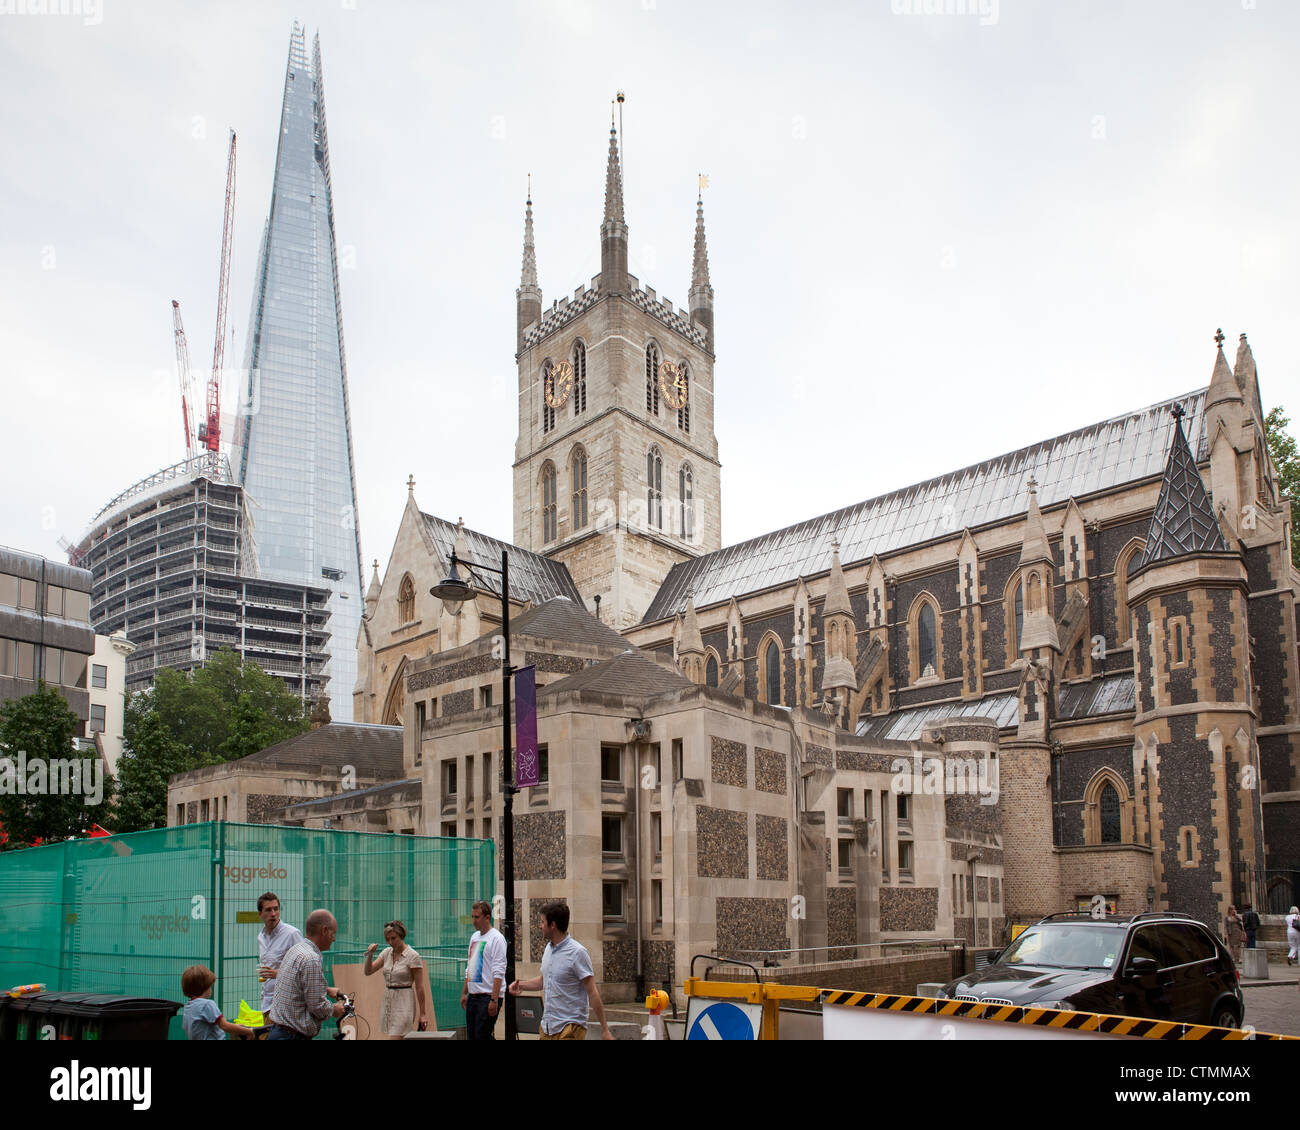 The Shard skyscraper next to Southwark Cathedral Stock Photo